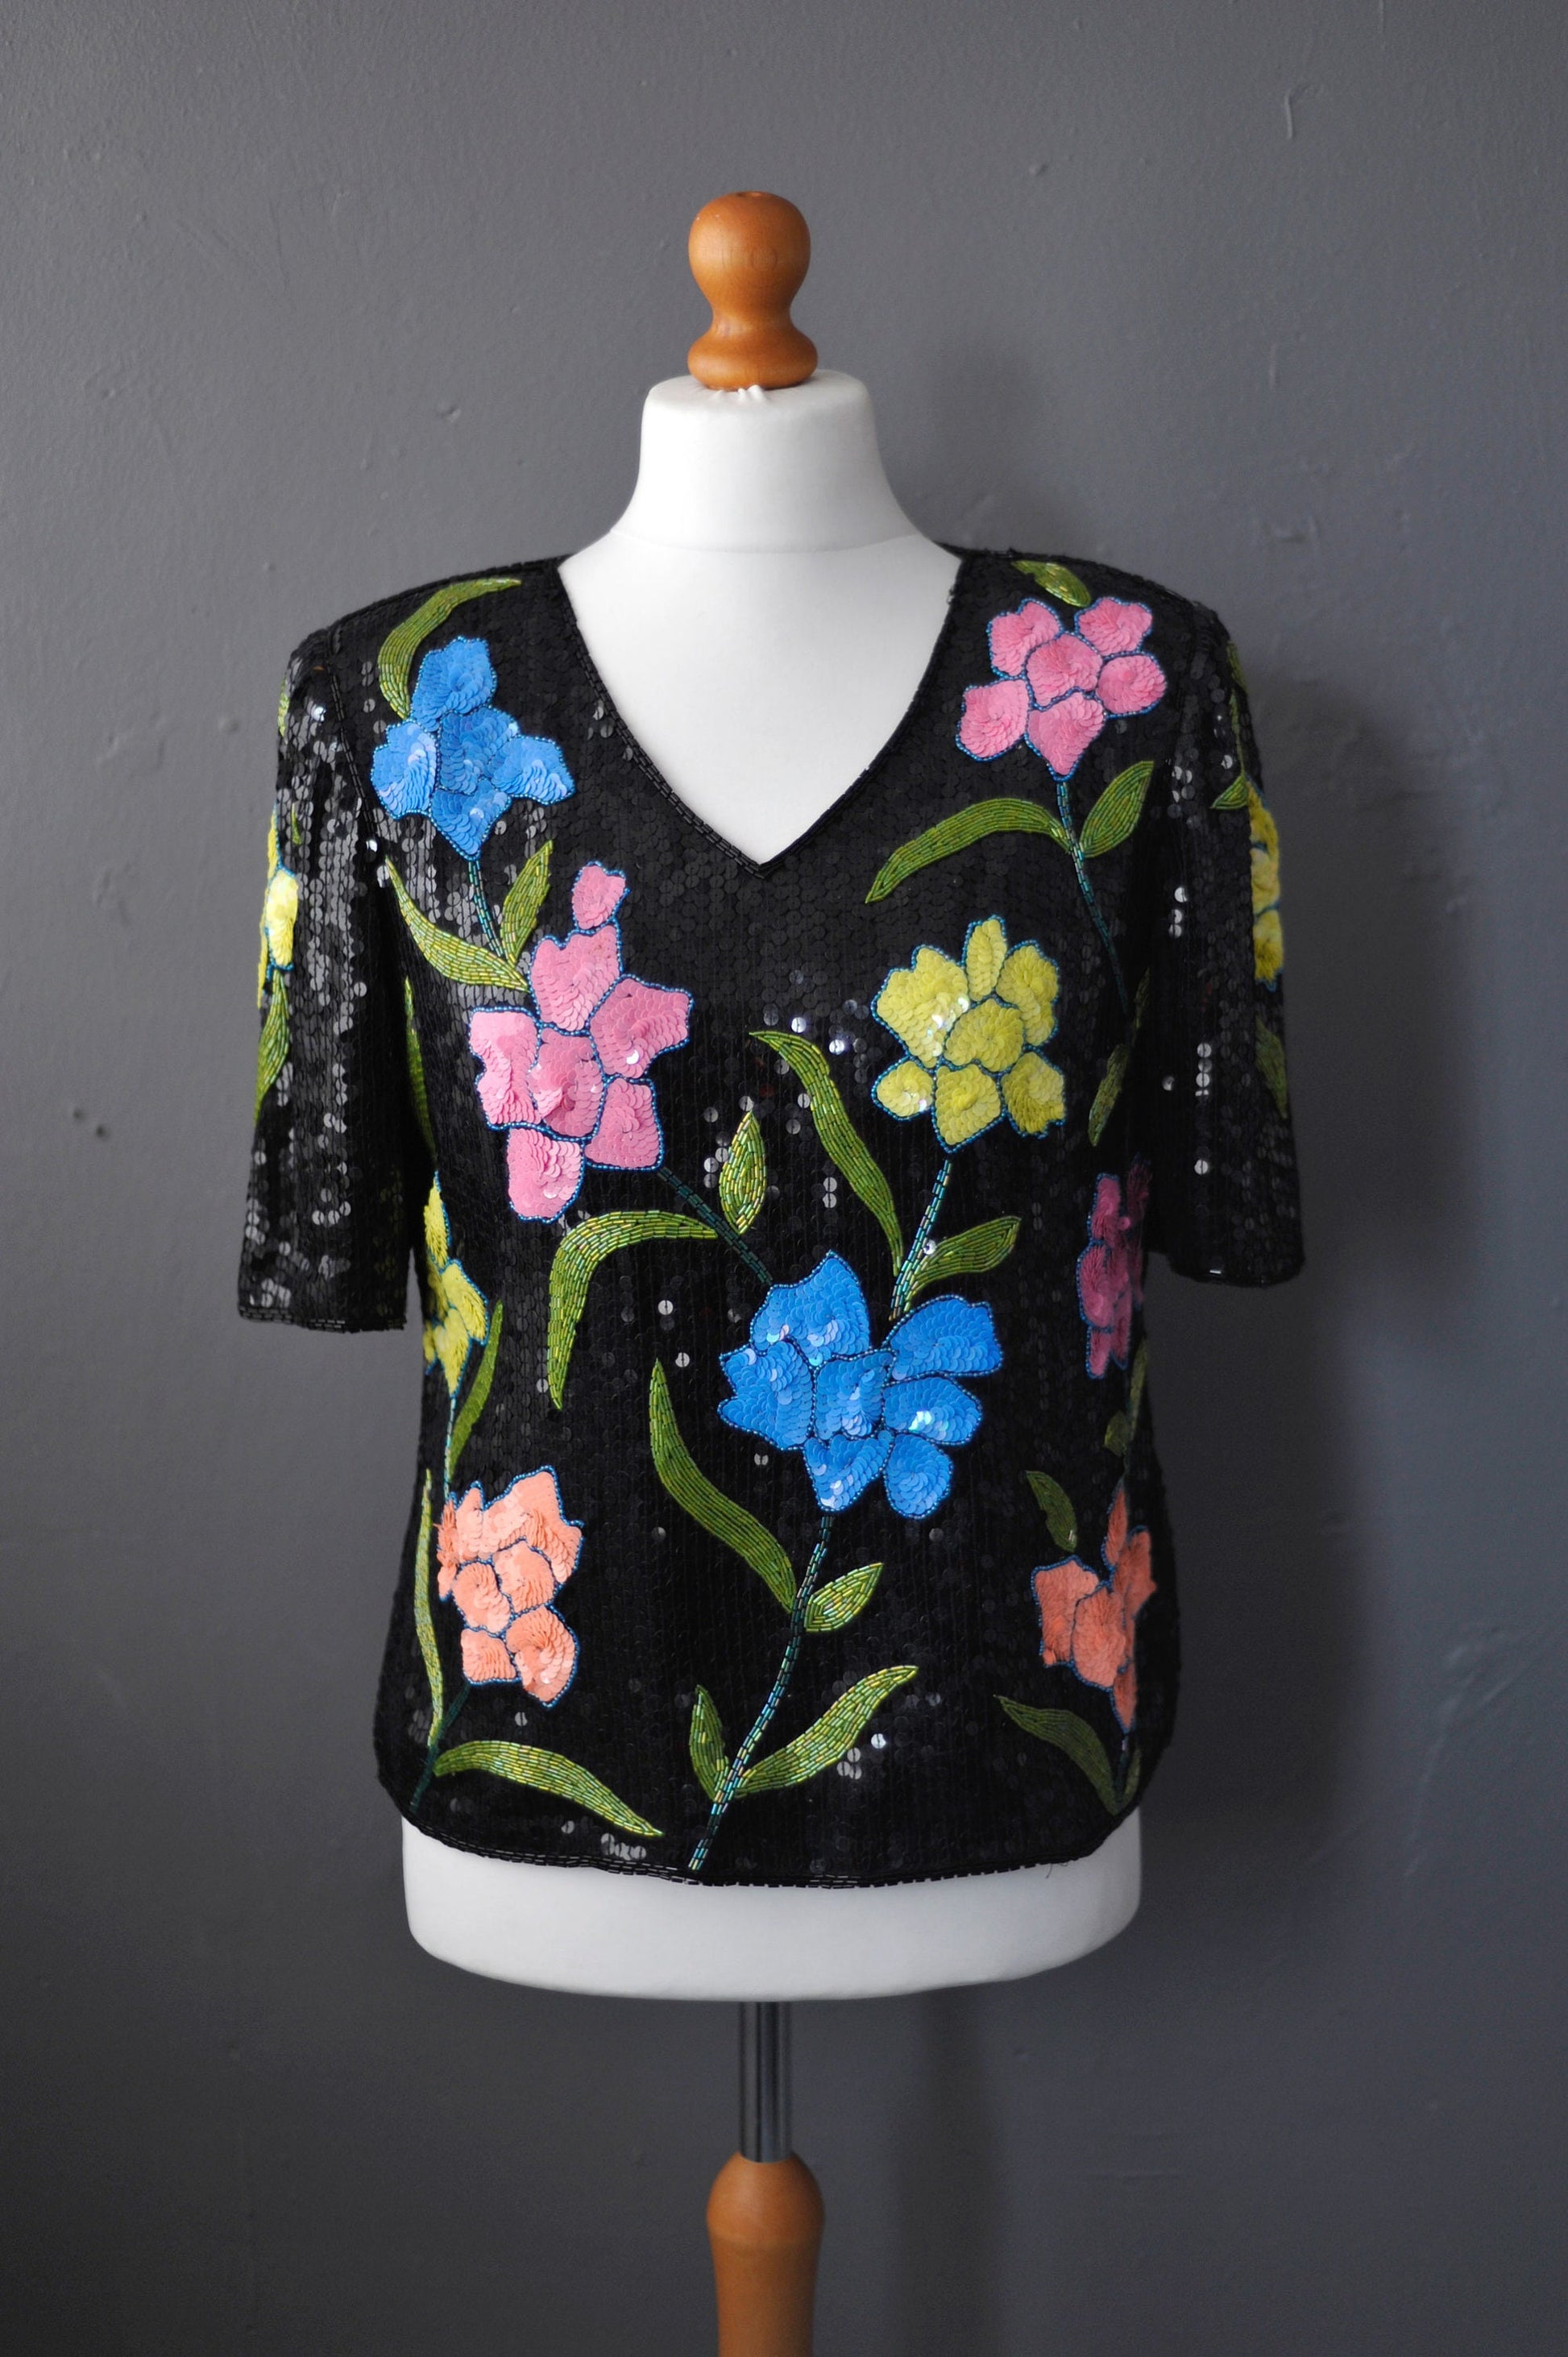 80s Sequin Silk Top by Tricoville, Size Medium